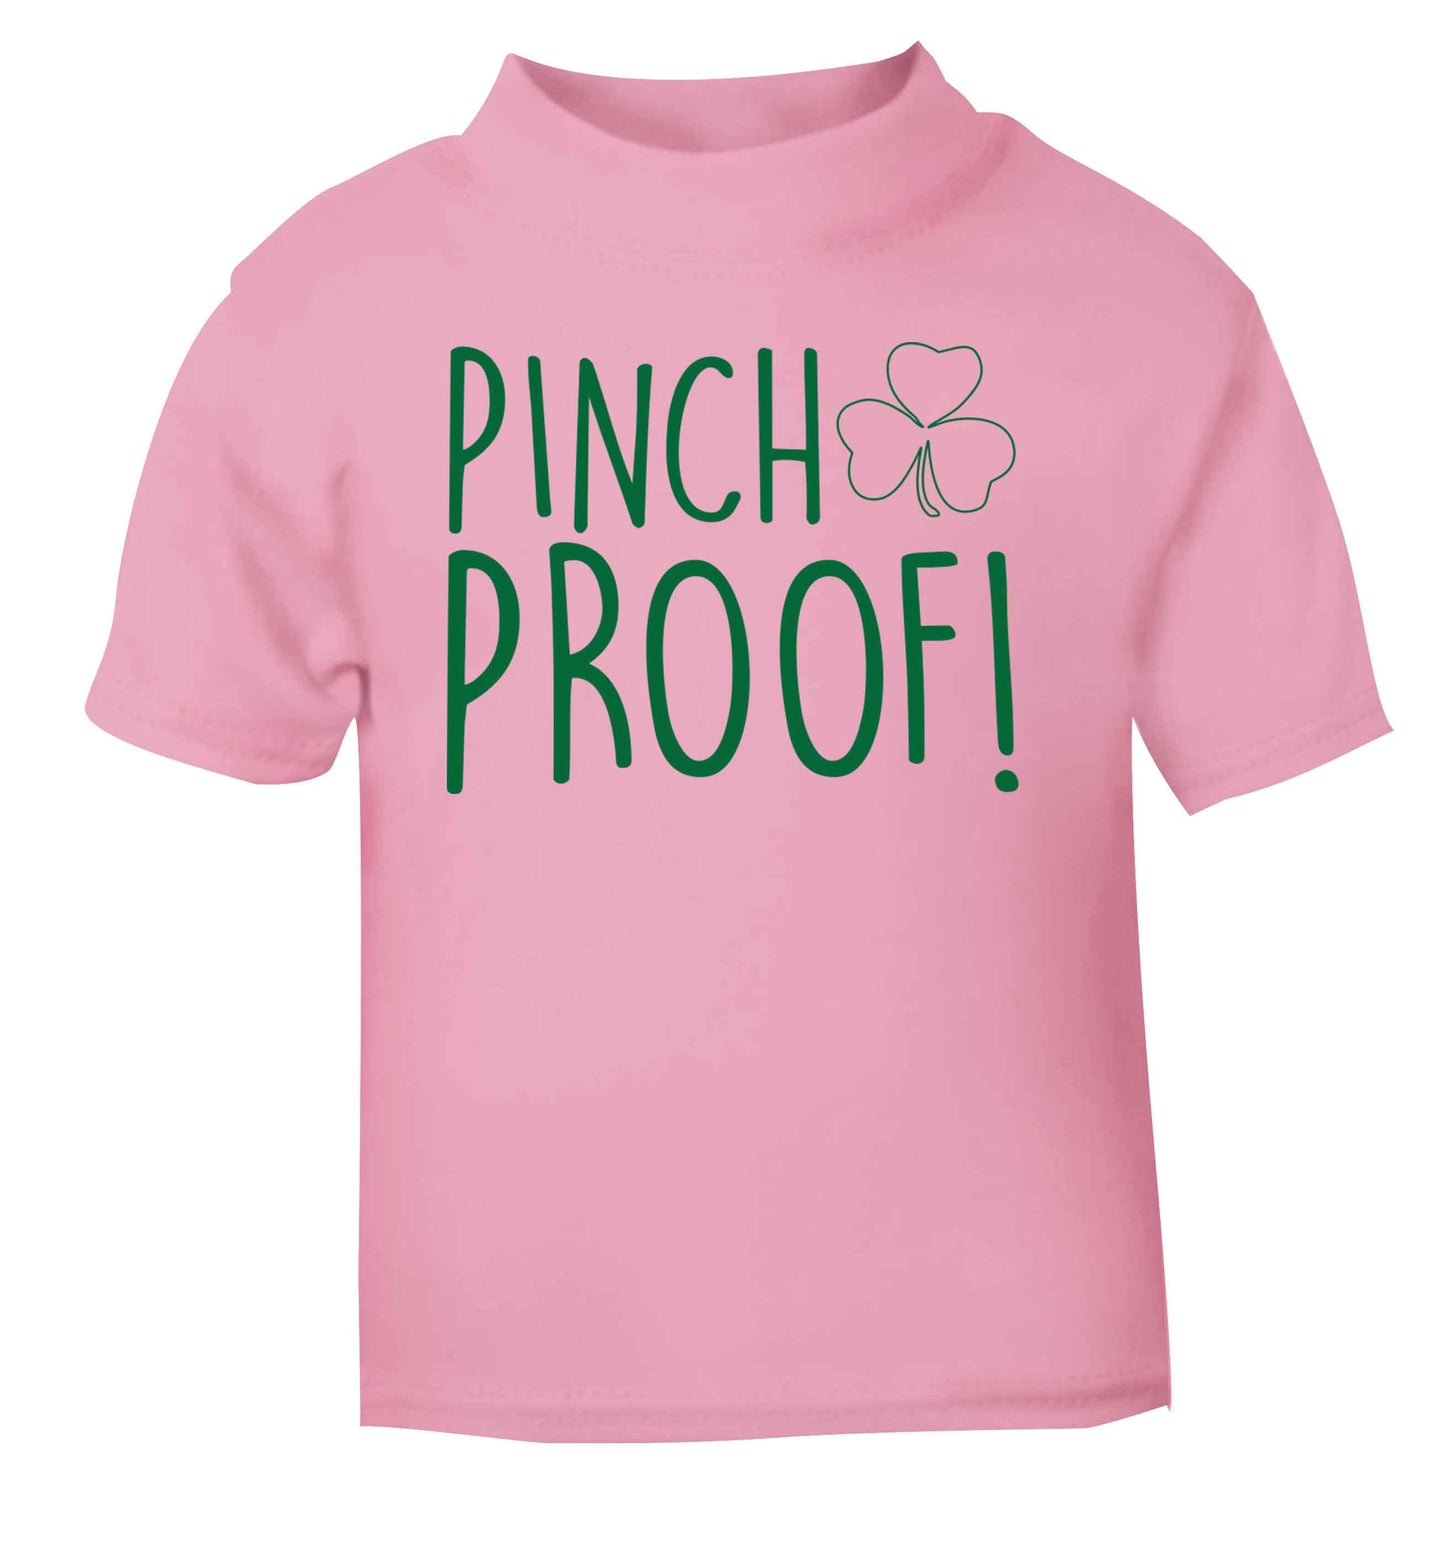 Pinch Proof light pink baby toddler Tshirt 2 Years